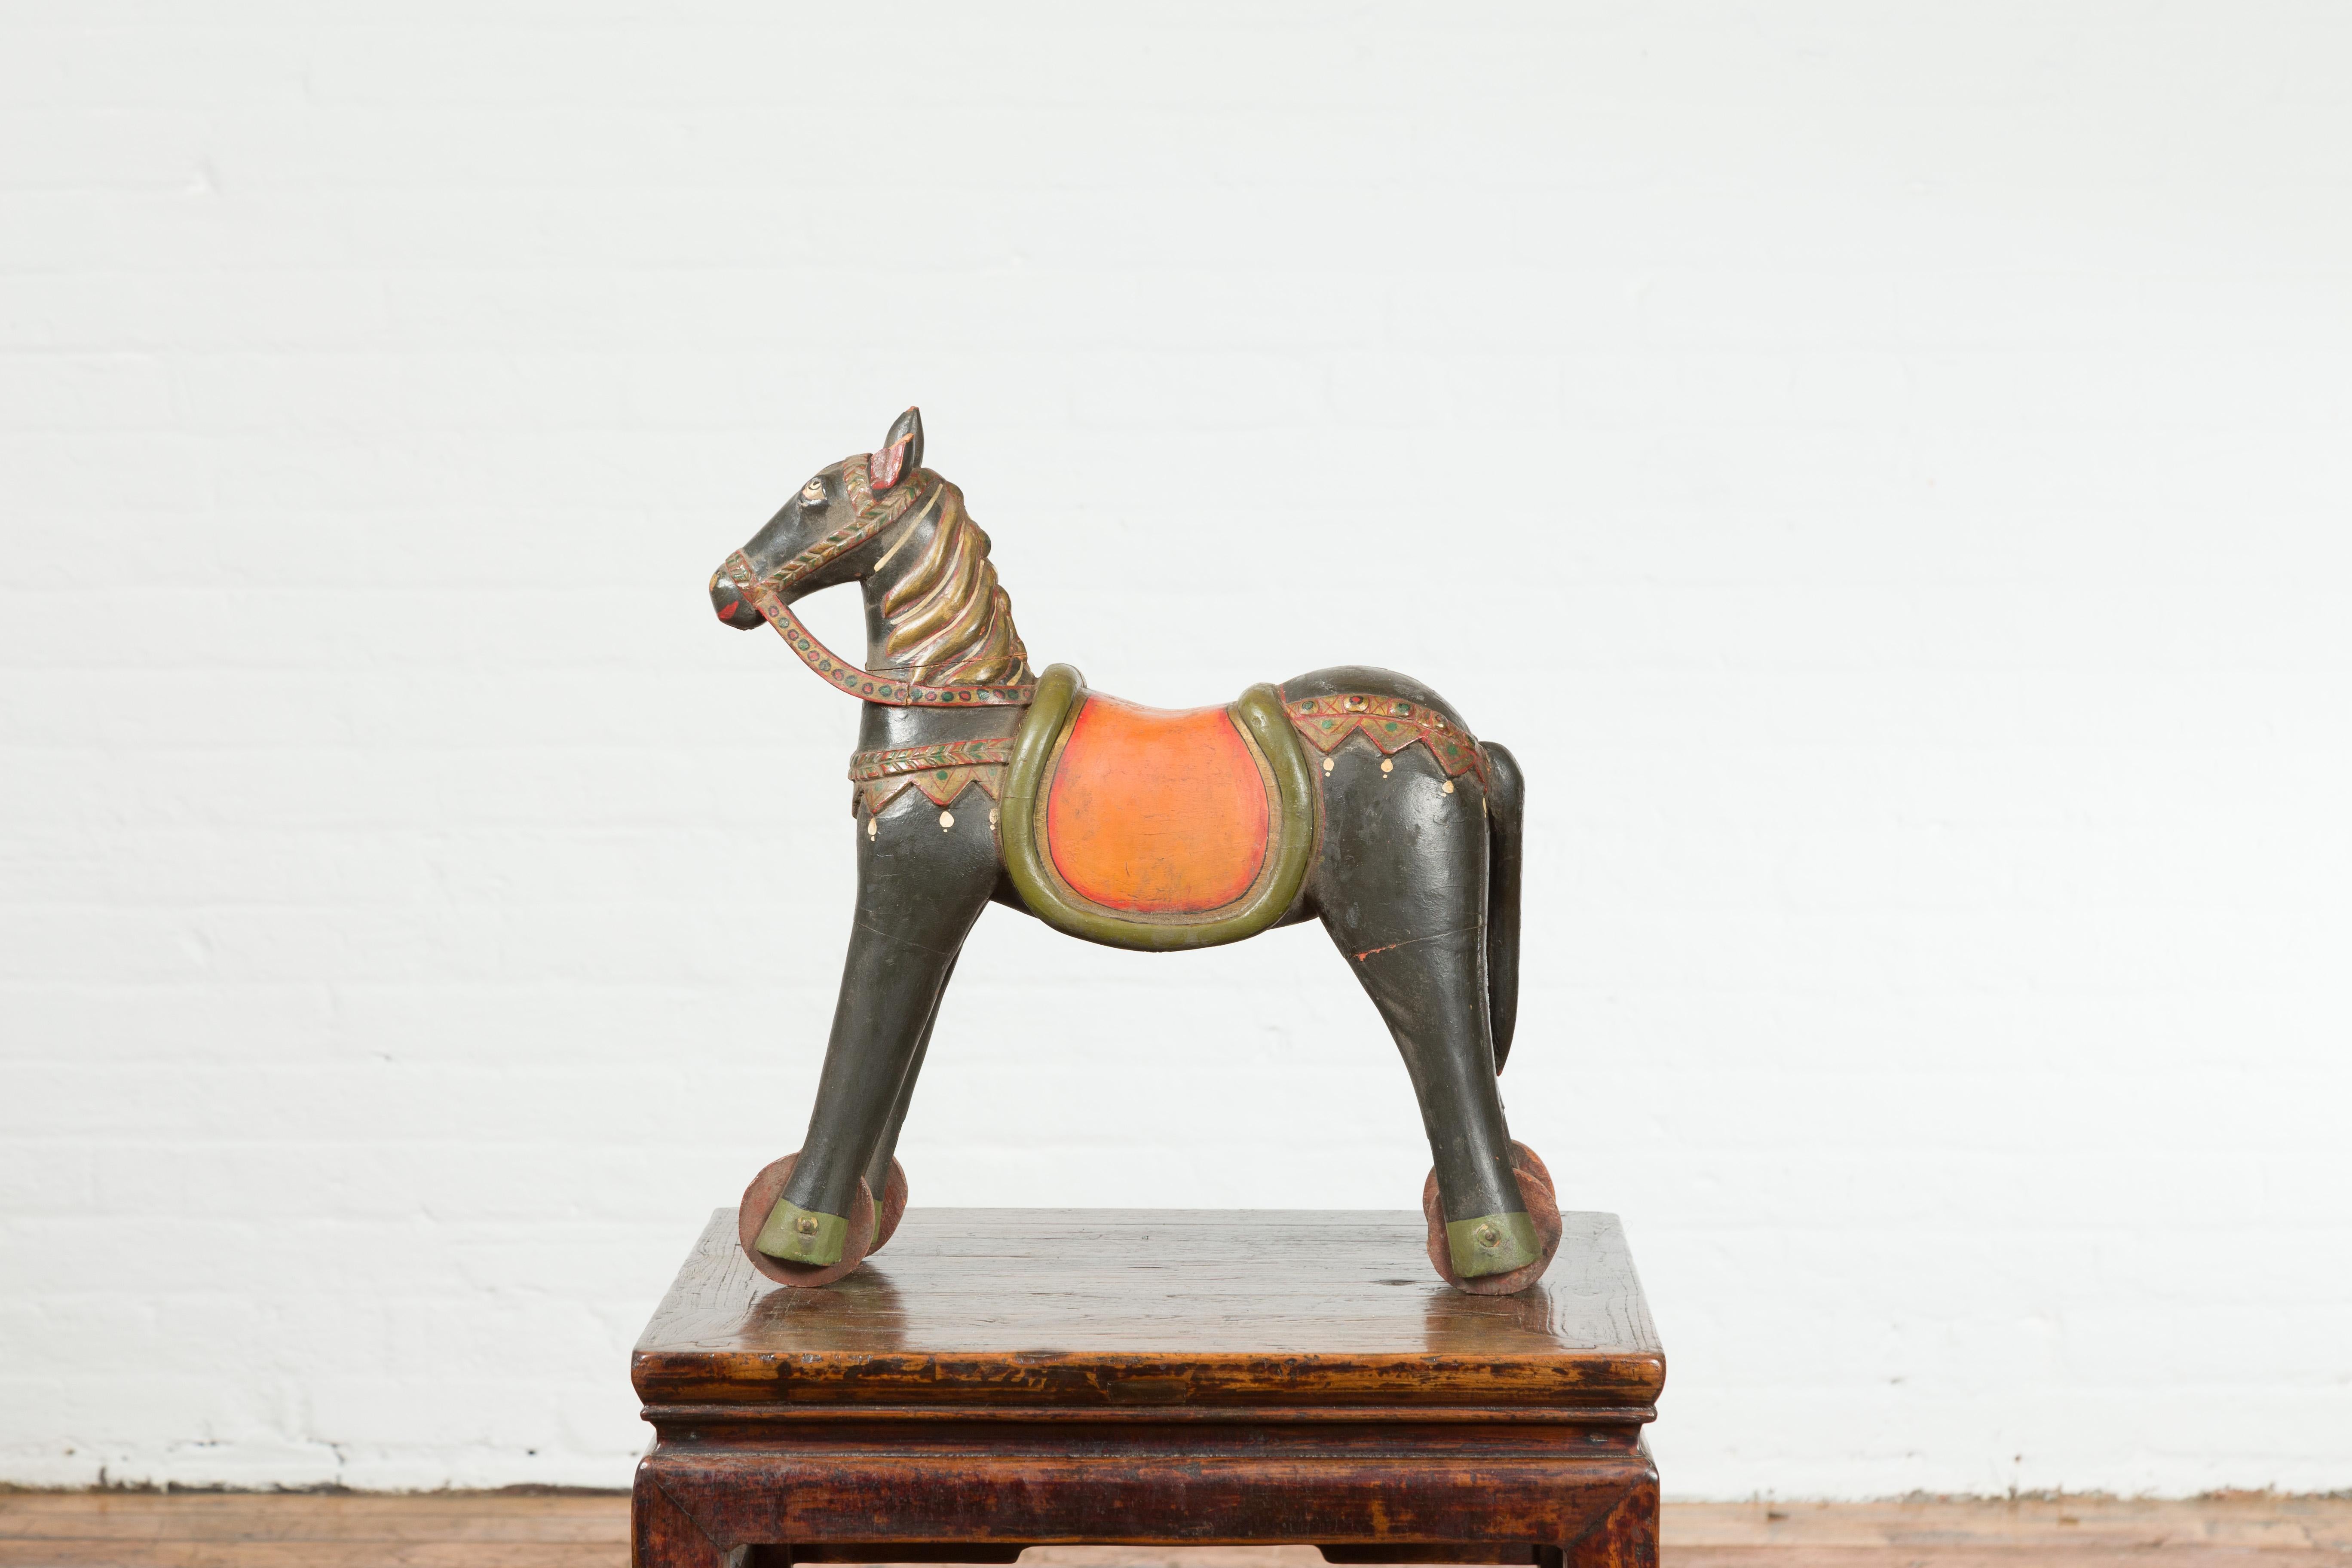 20th Century Antique Indian Mughal Horse on Wheels Sculpture with Polychrome Finish